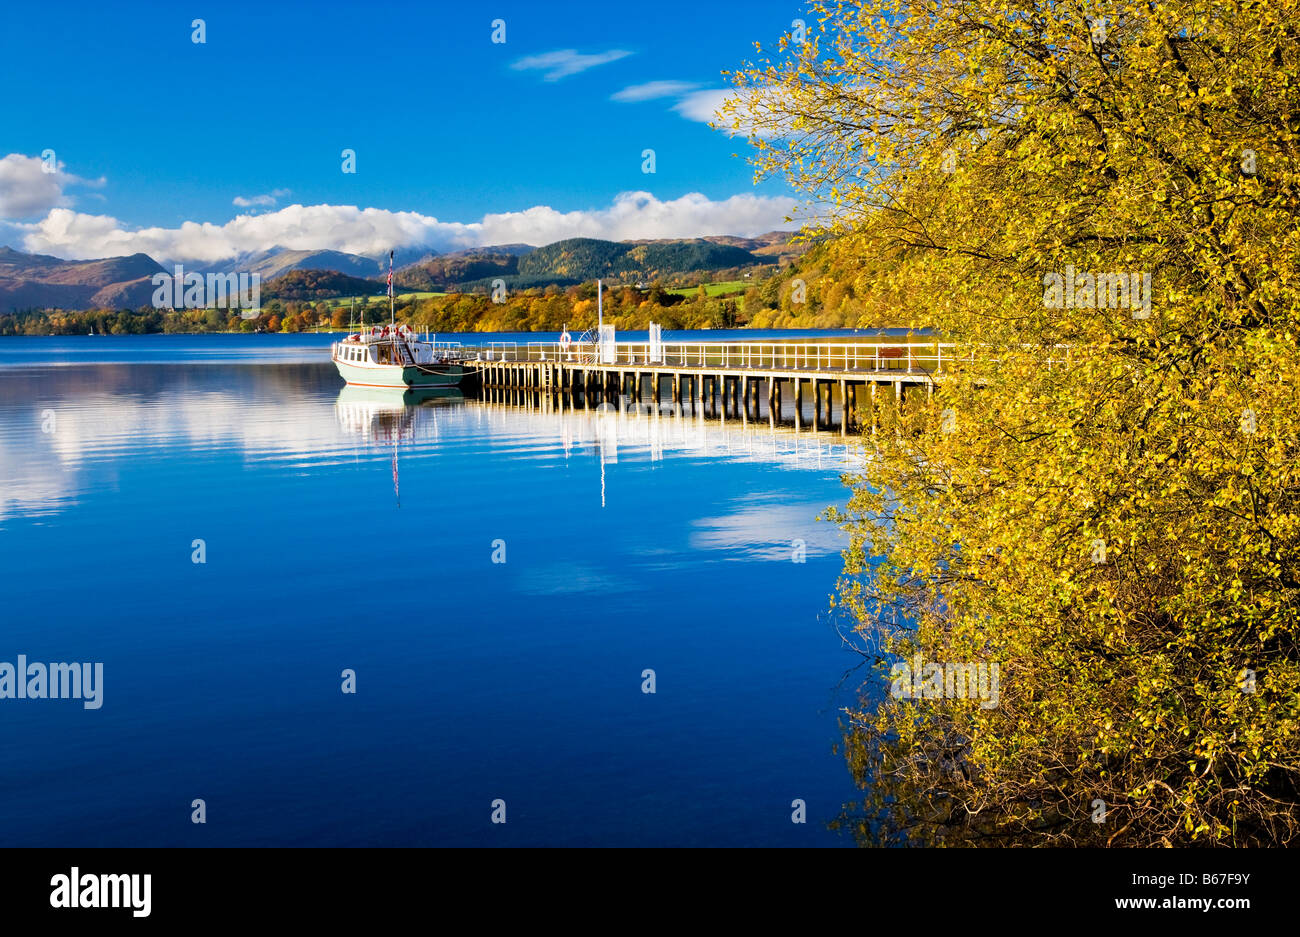 A sunny autumn day on the shores of Ullswater in the Lake District National Park Cumbria England UK by the Pooley Bridge steamer Stock Photo